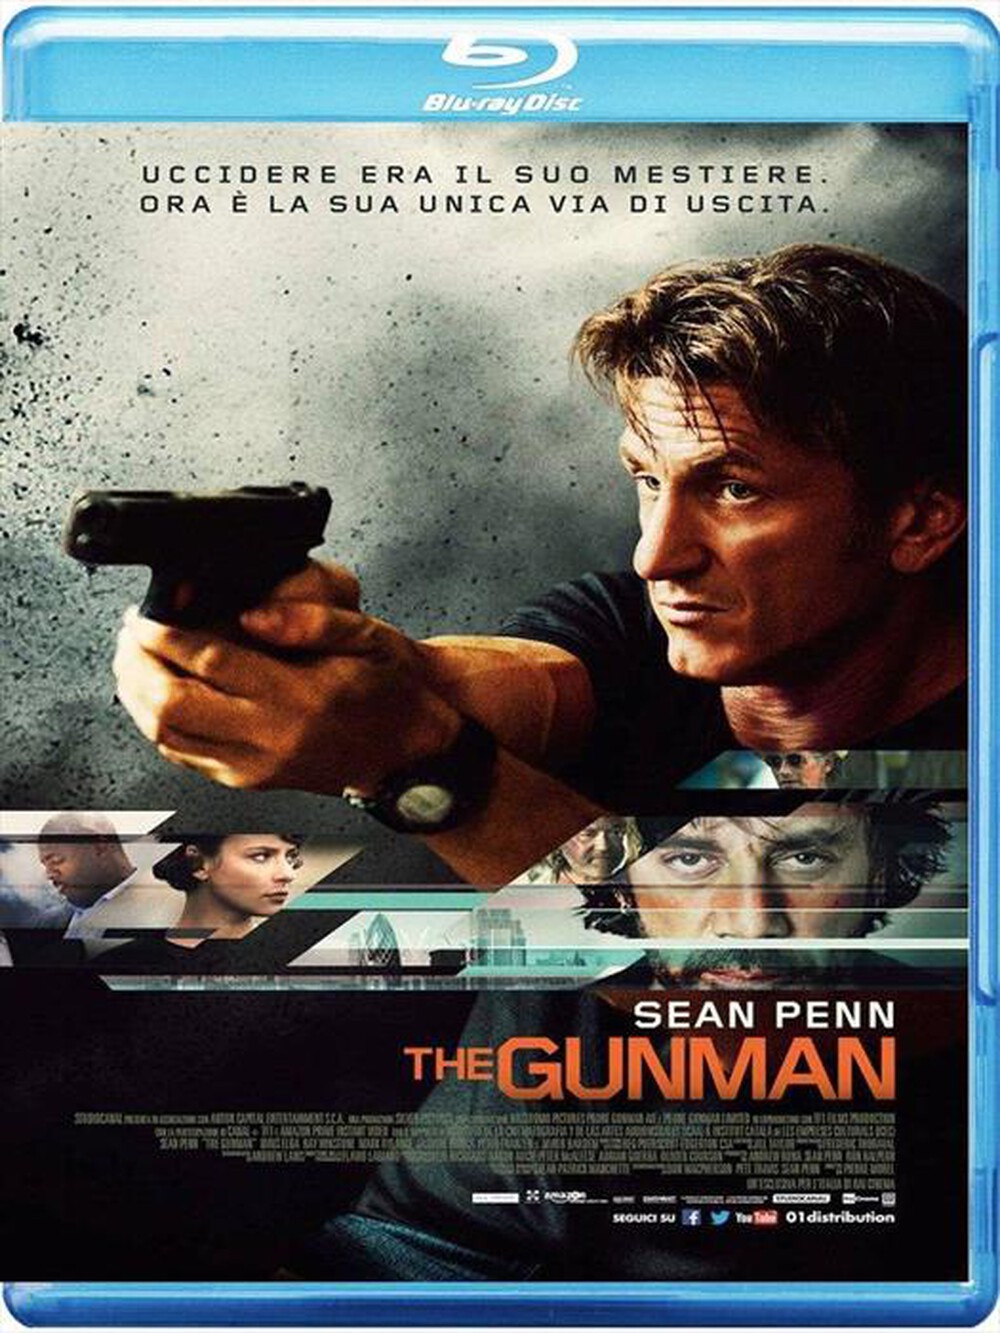 "EAGLE PICTURES - Gunman (The) - "